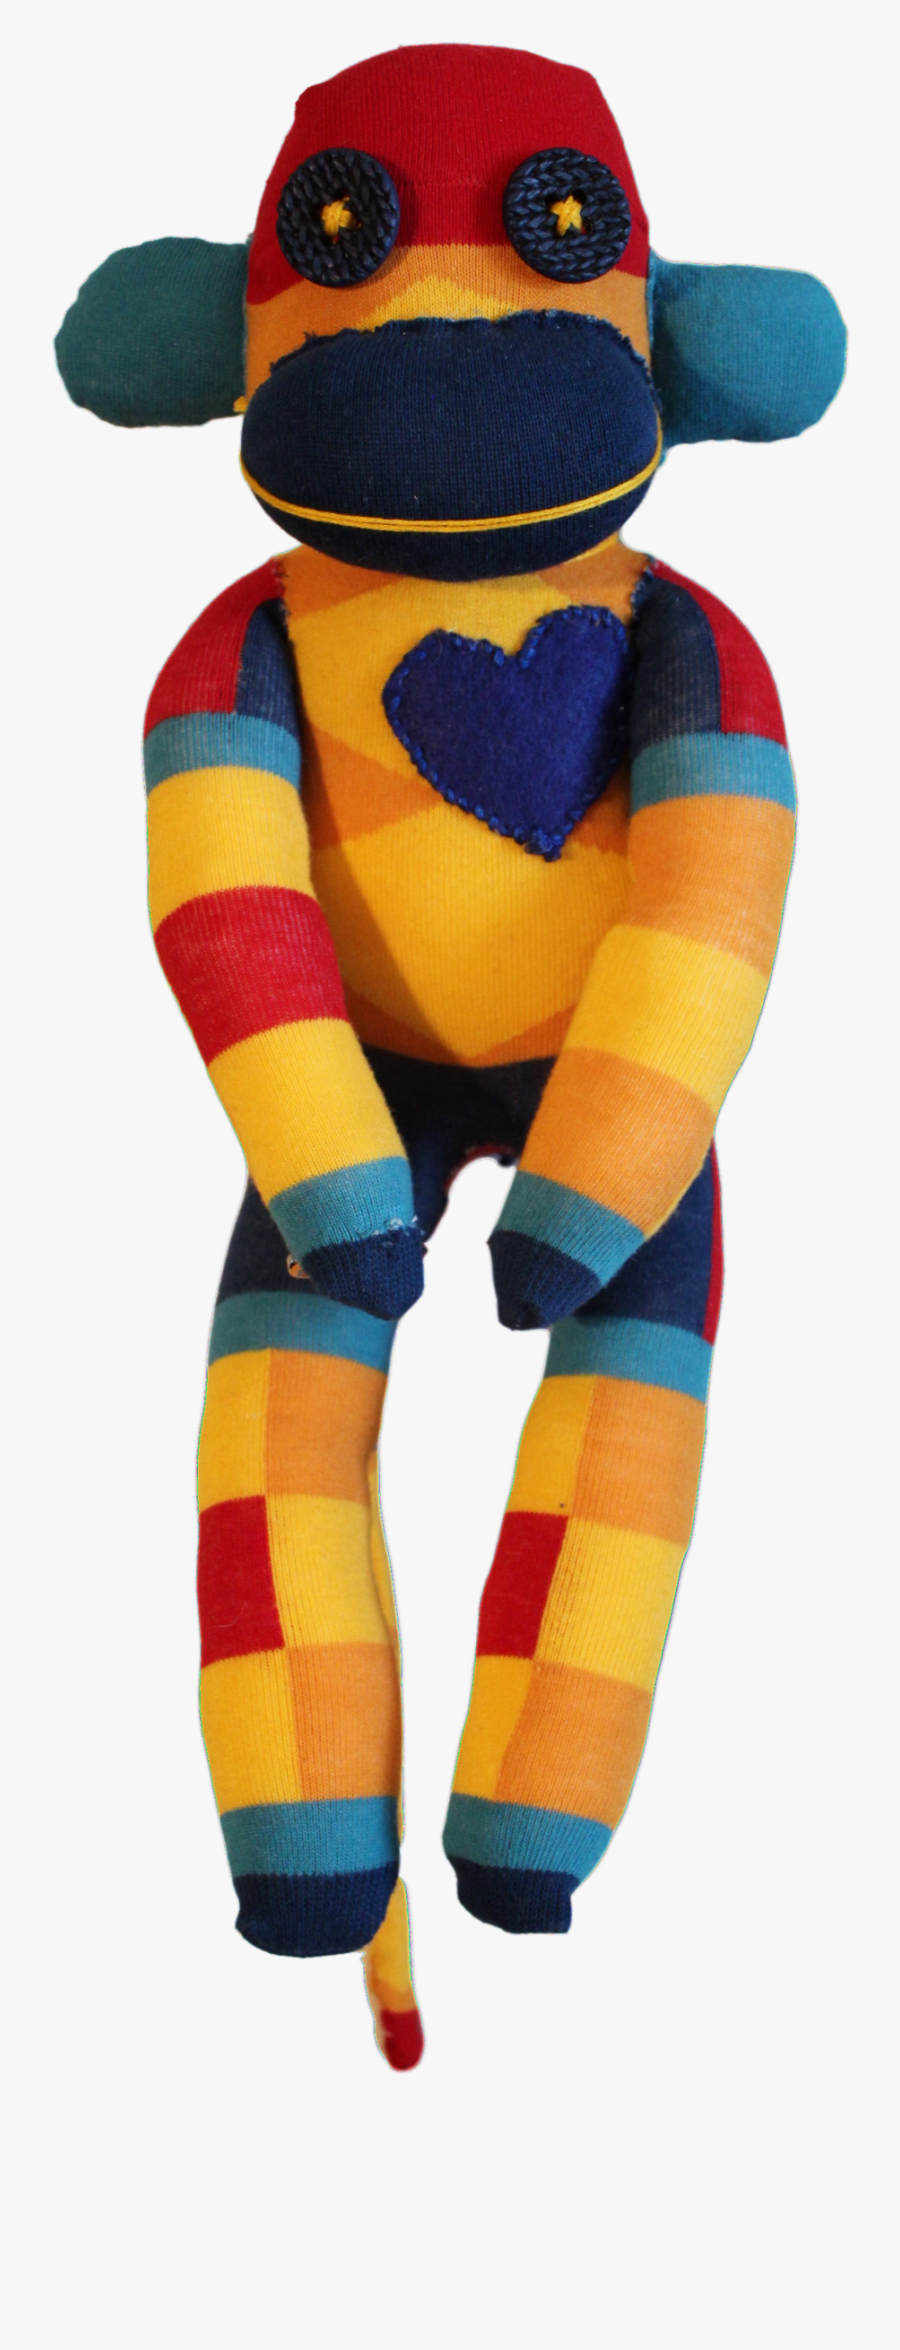 Handmade Sock Monkey Plush Toy With Funky Pattern Socks - Tights, Transparent Clipart